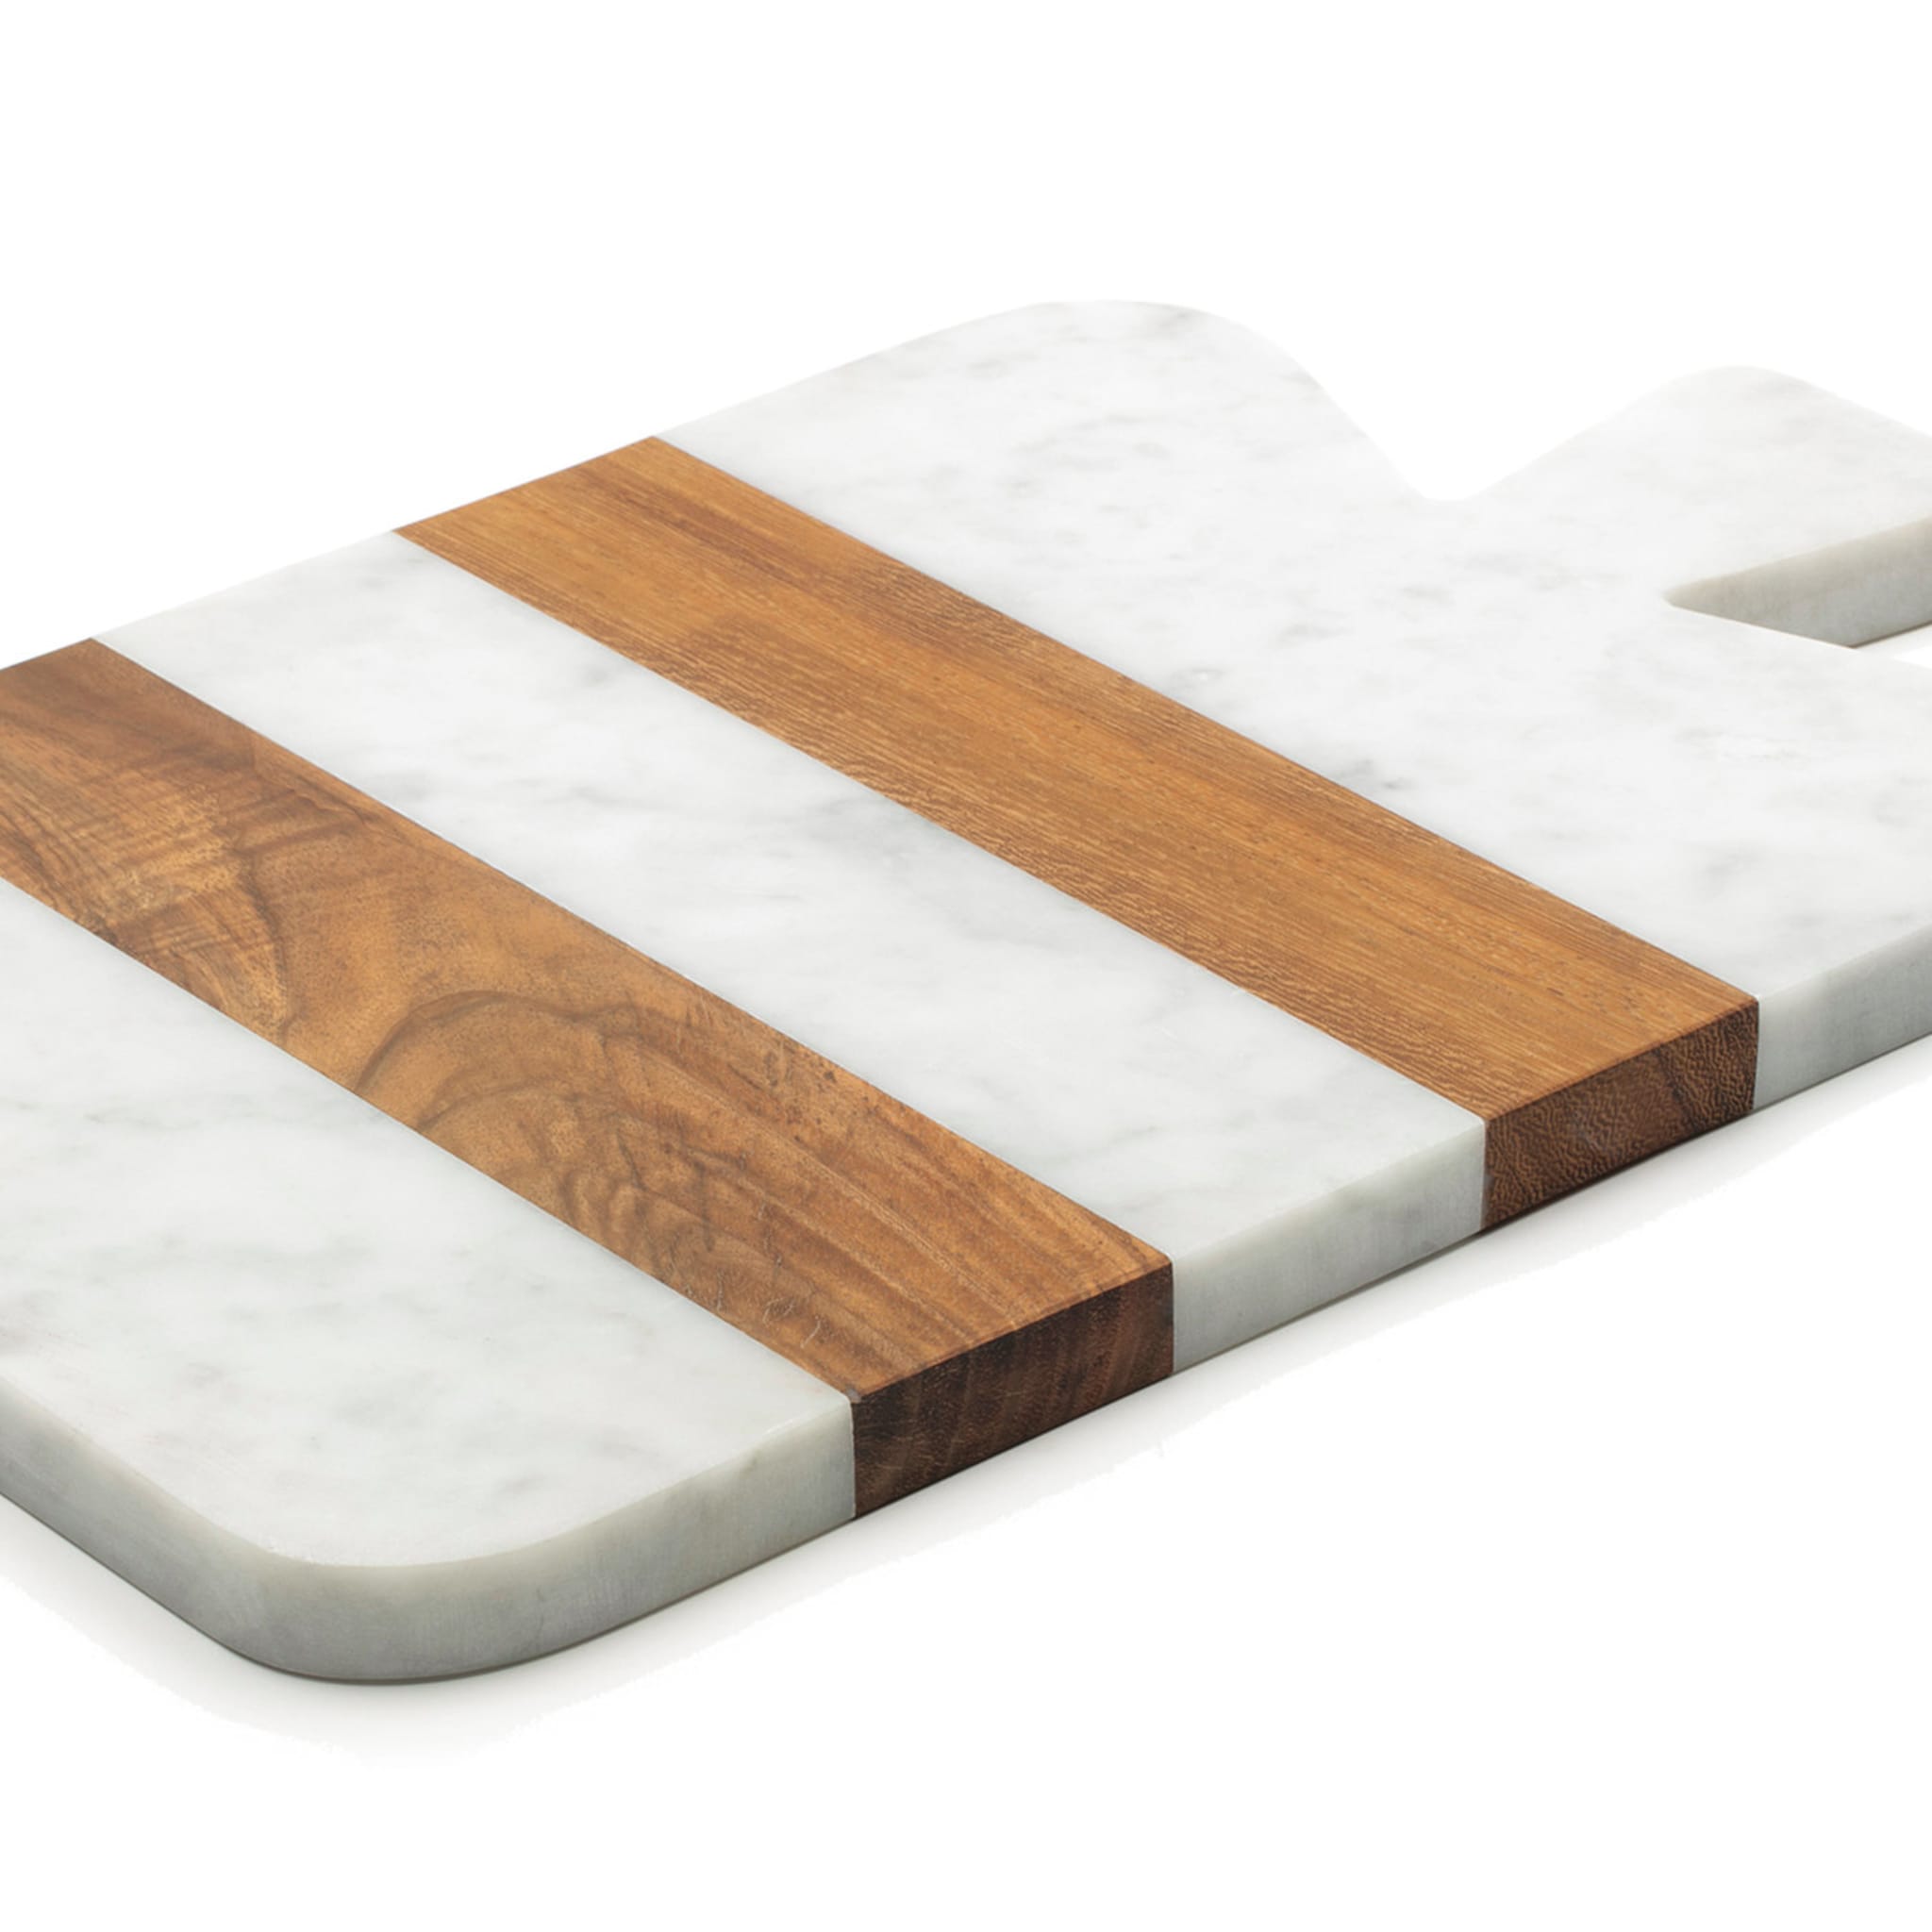 White Marble and Wood Thick Cutting Board - Alternative view 1